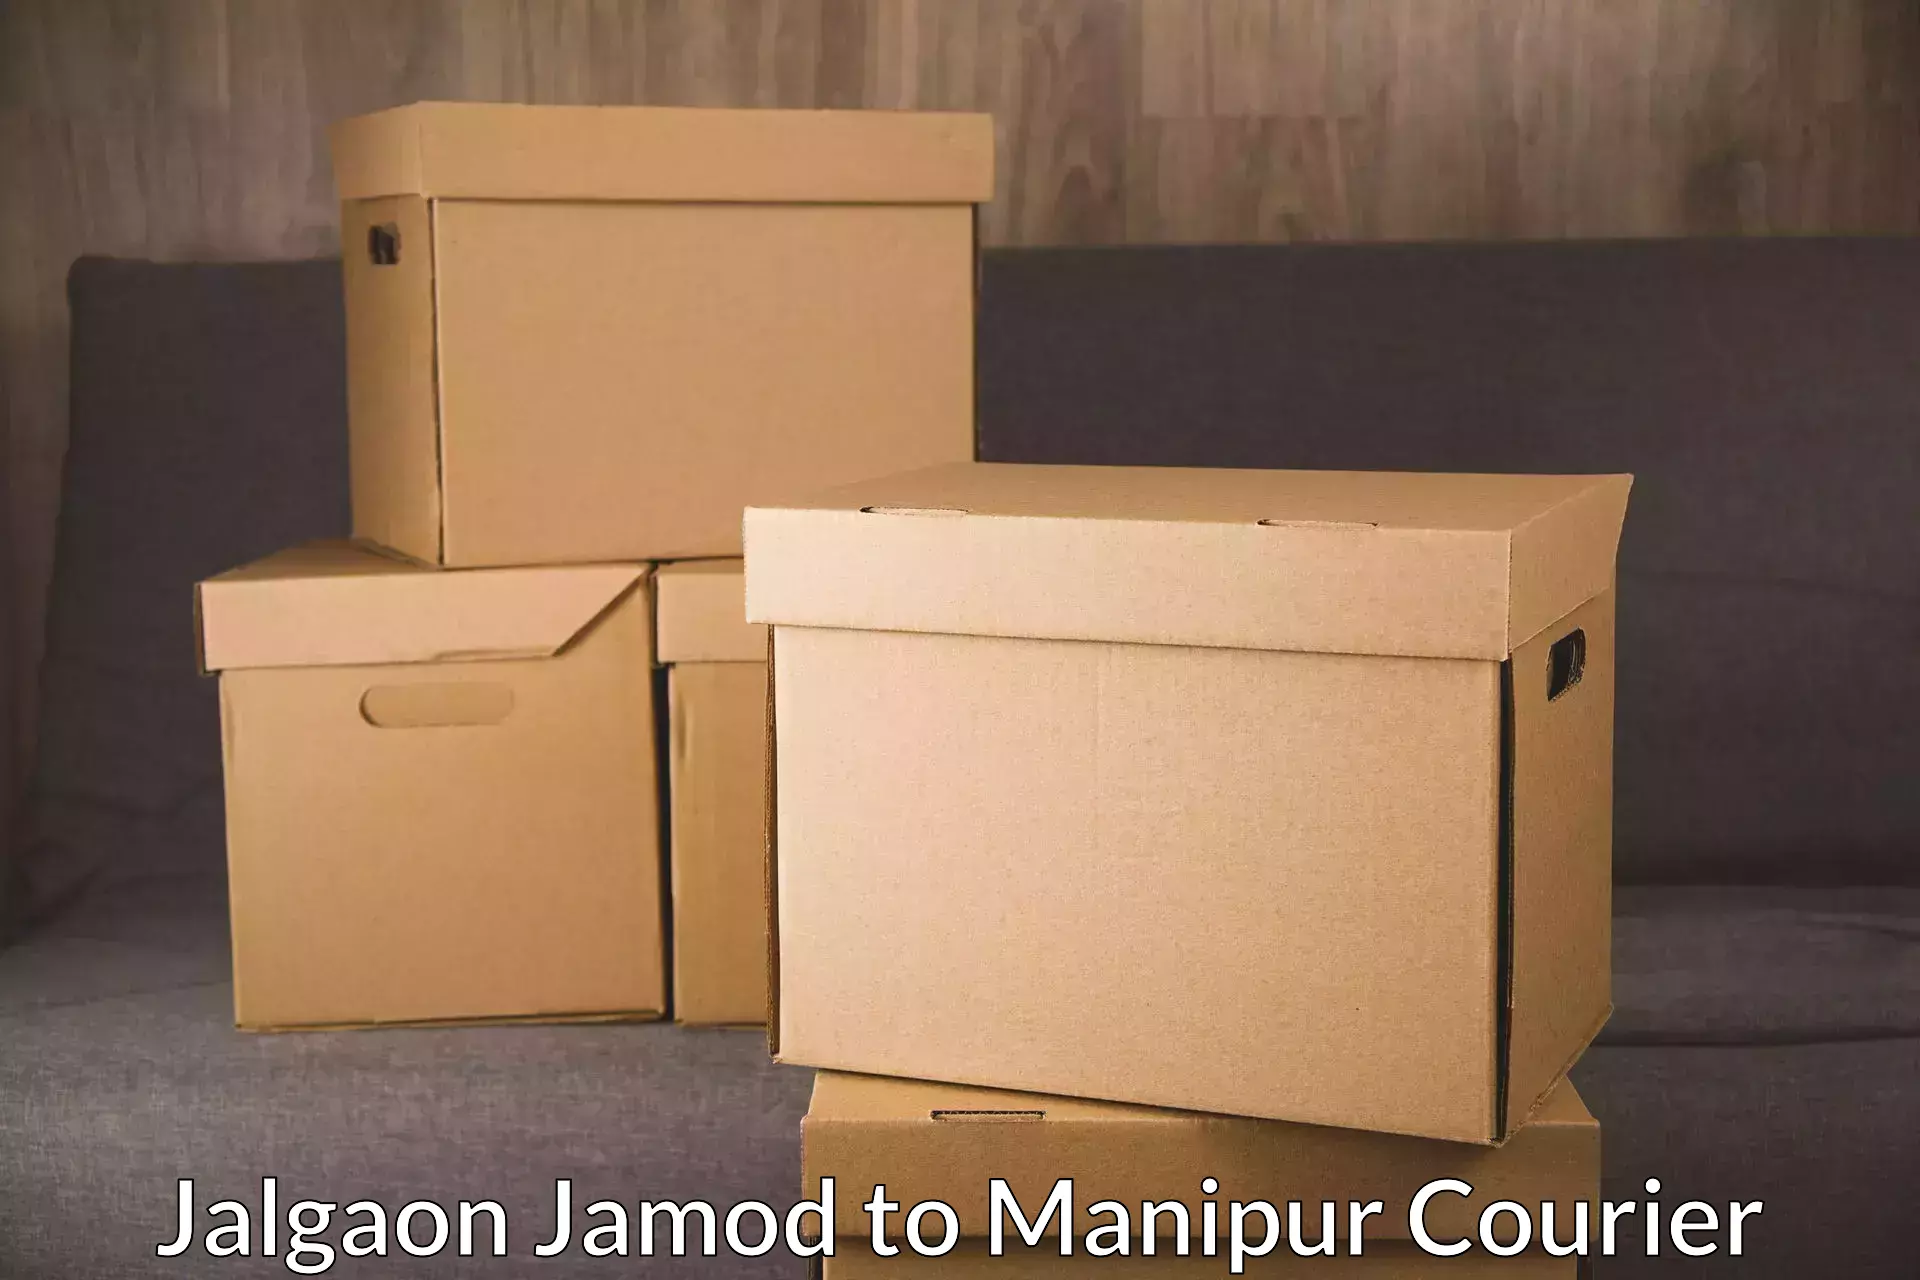 Round-the-clock parcel delivery Jalgaon Jamod to Chandel